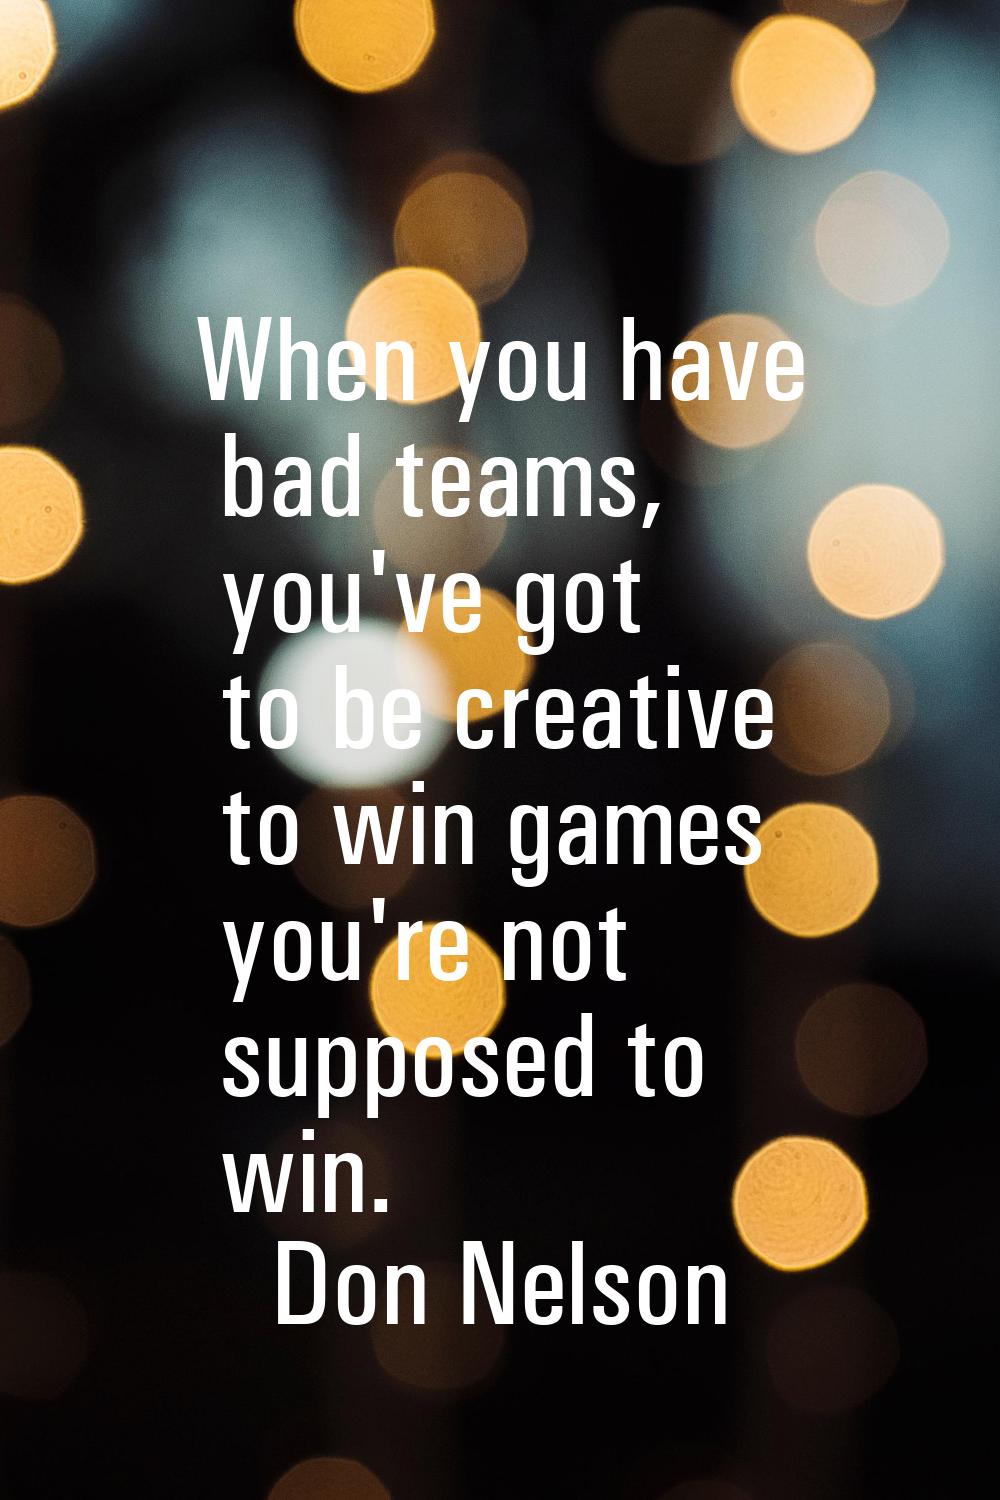 When you have bad teams, you've got to be creative to win games you're not supposed to win.